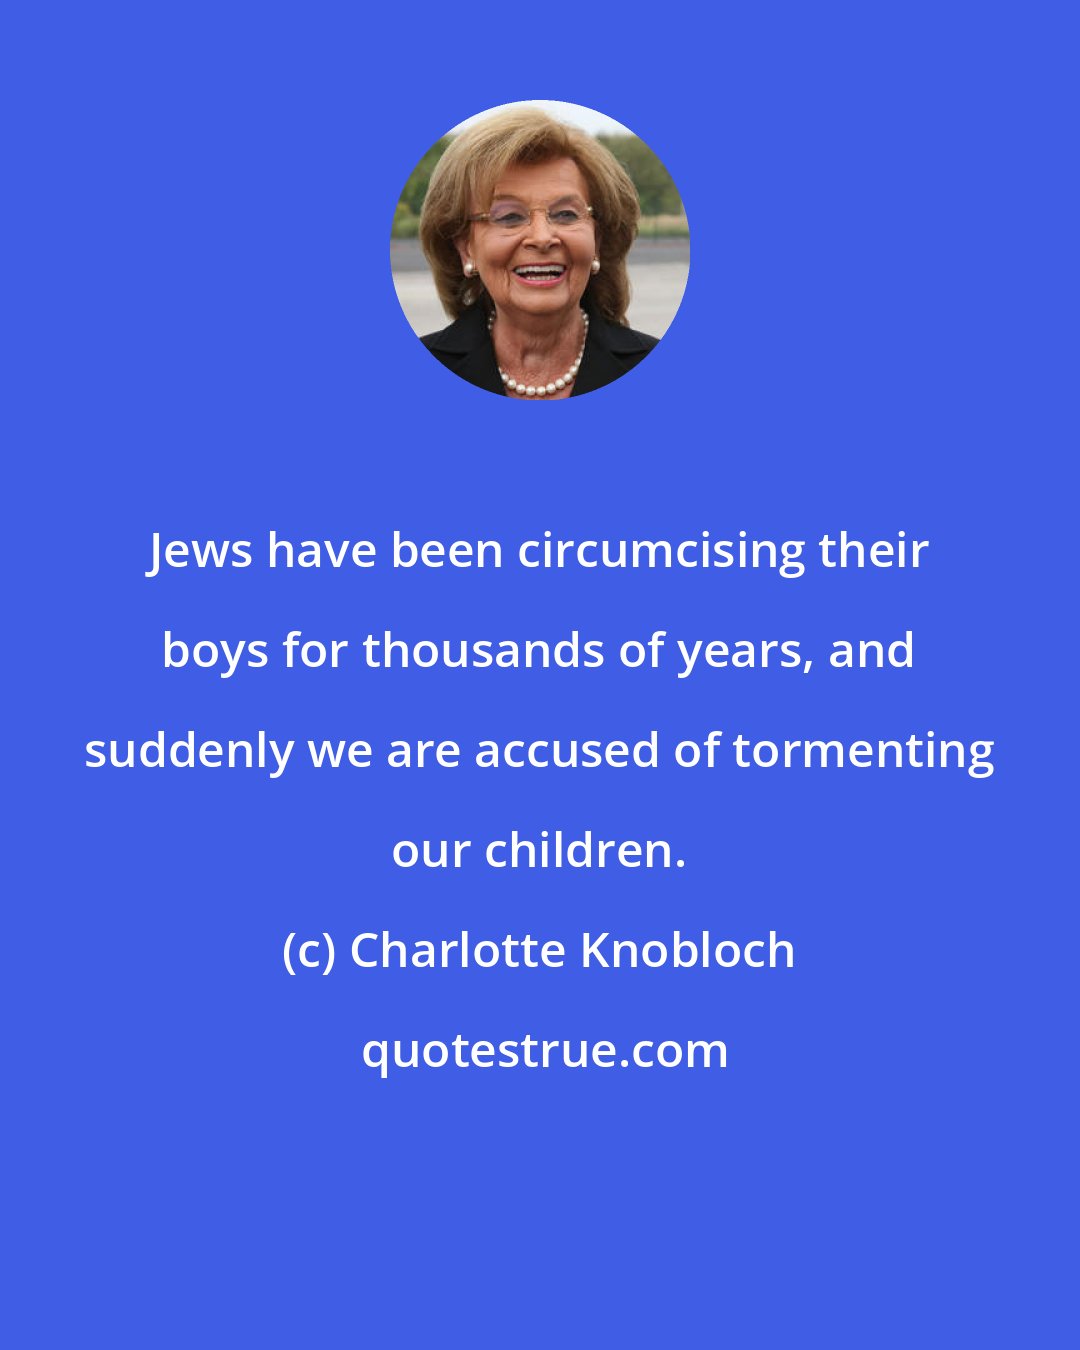 Charlotte Knobloch: Jews have been circumcising their boys for thousands of years, and suddenly we are accused of tormenting our children.